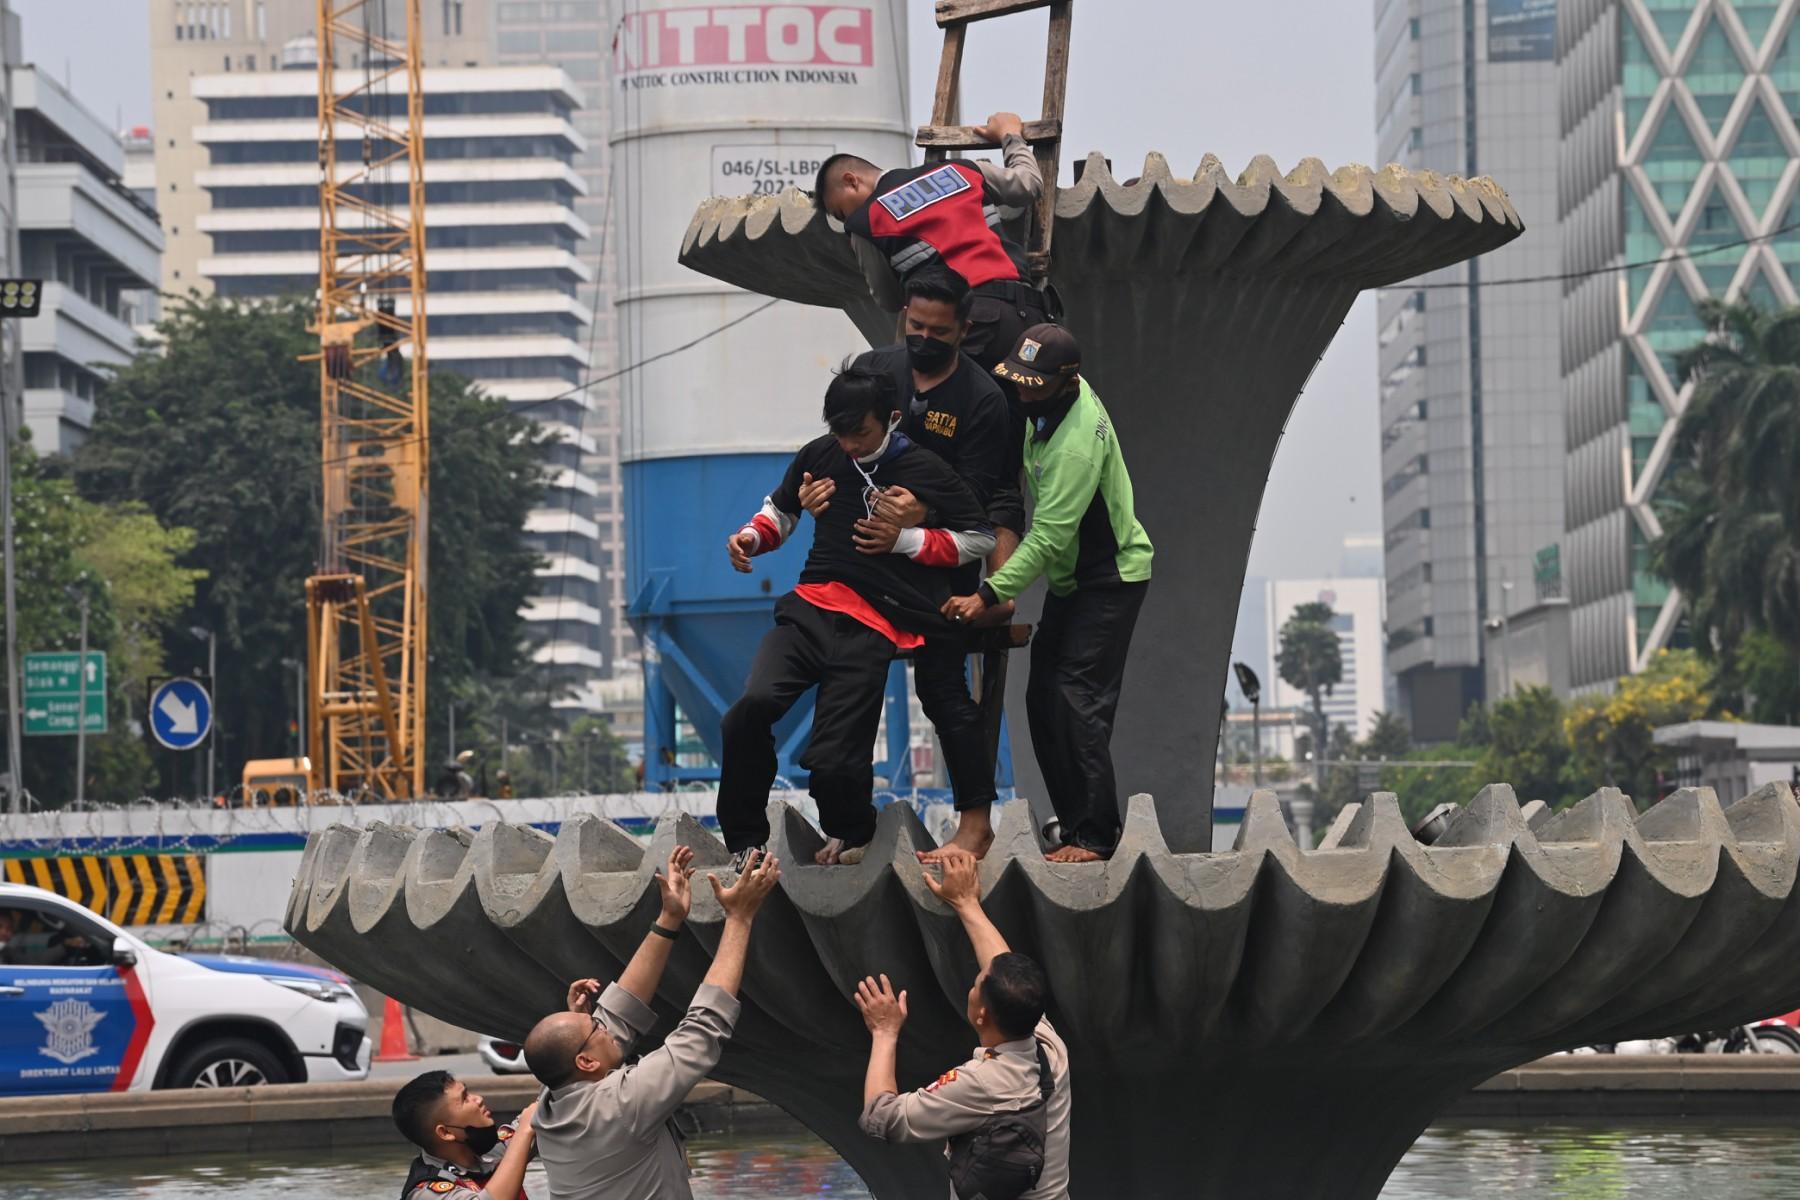 Police arrest a protester who climbed a fountain near the presidential palace during a protest by students against high prices of supplies, the postponement of presidential elections and an extension of the president's term, in Jakarta on April 11. Photo: AFP